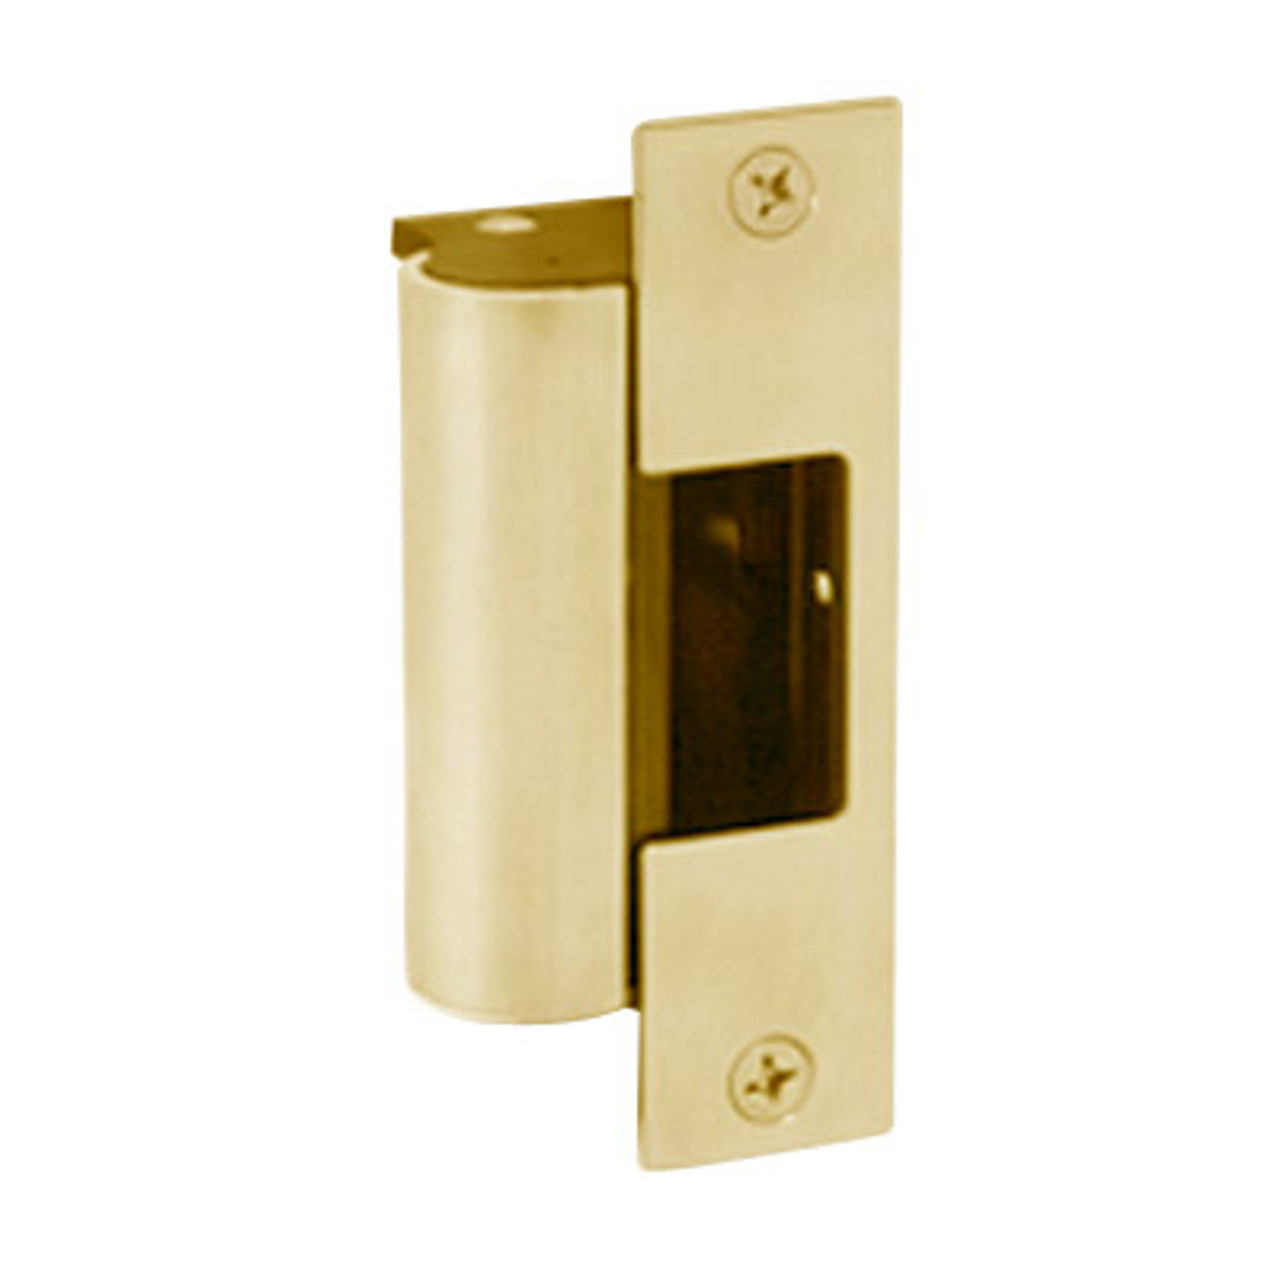 1006-F-612-LBSM Hes Fail Safe Electric Strike Body with Latchbolt Strike Monitor in Satin Bronze Finish